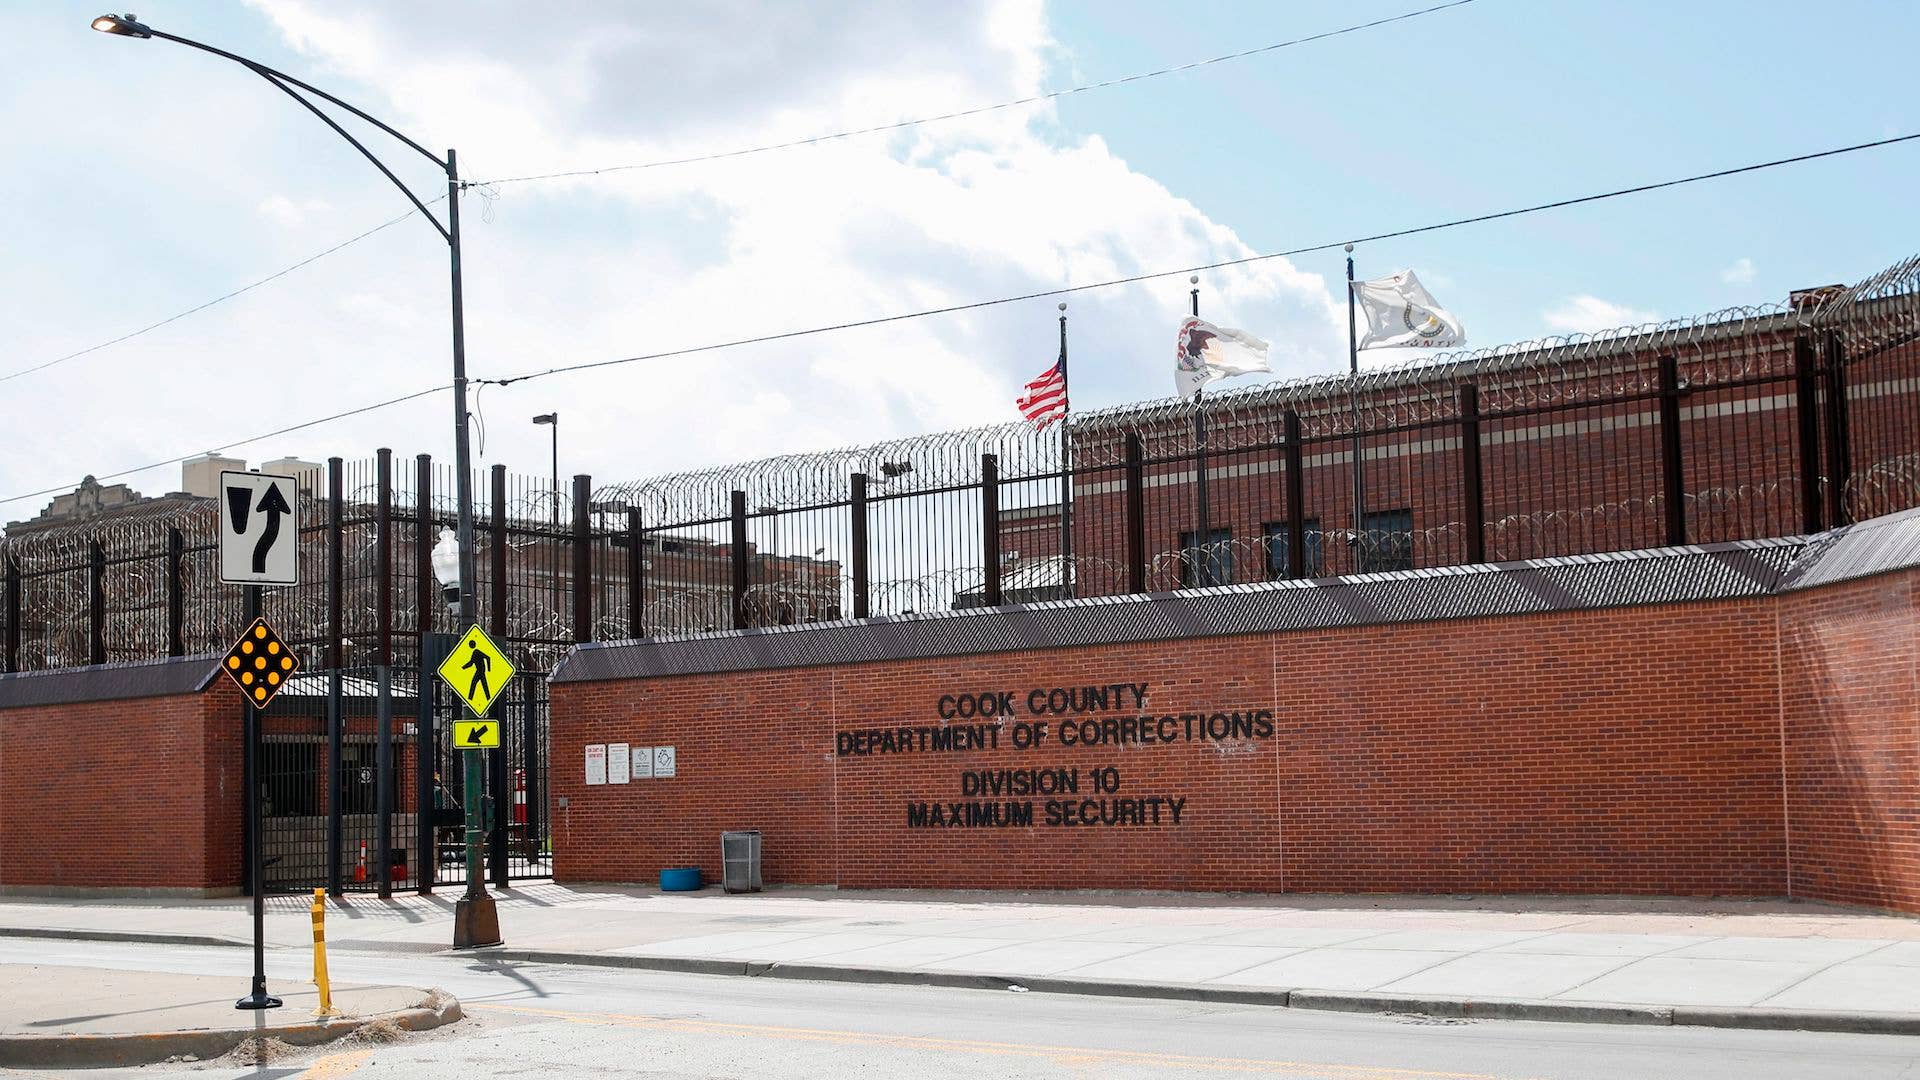 Photograph of Cook County Jail